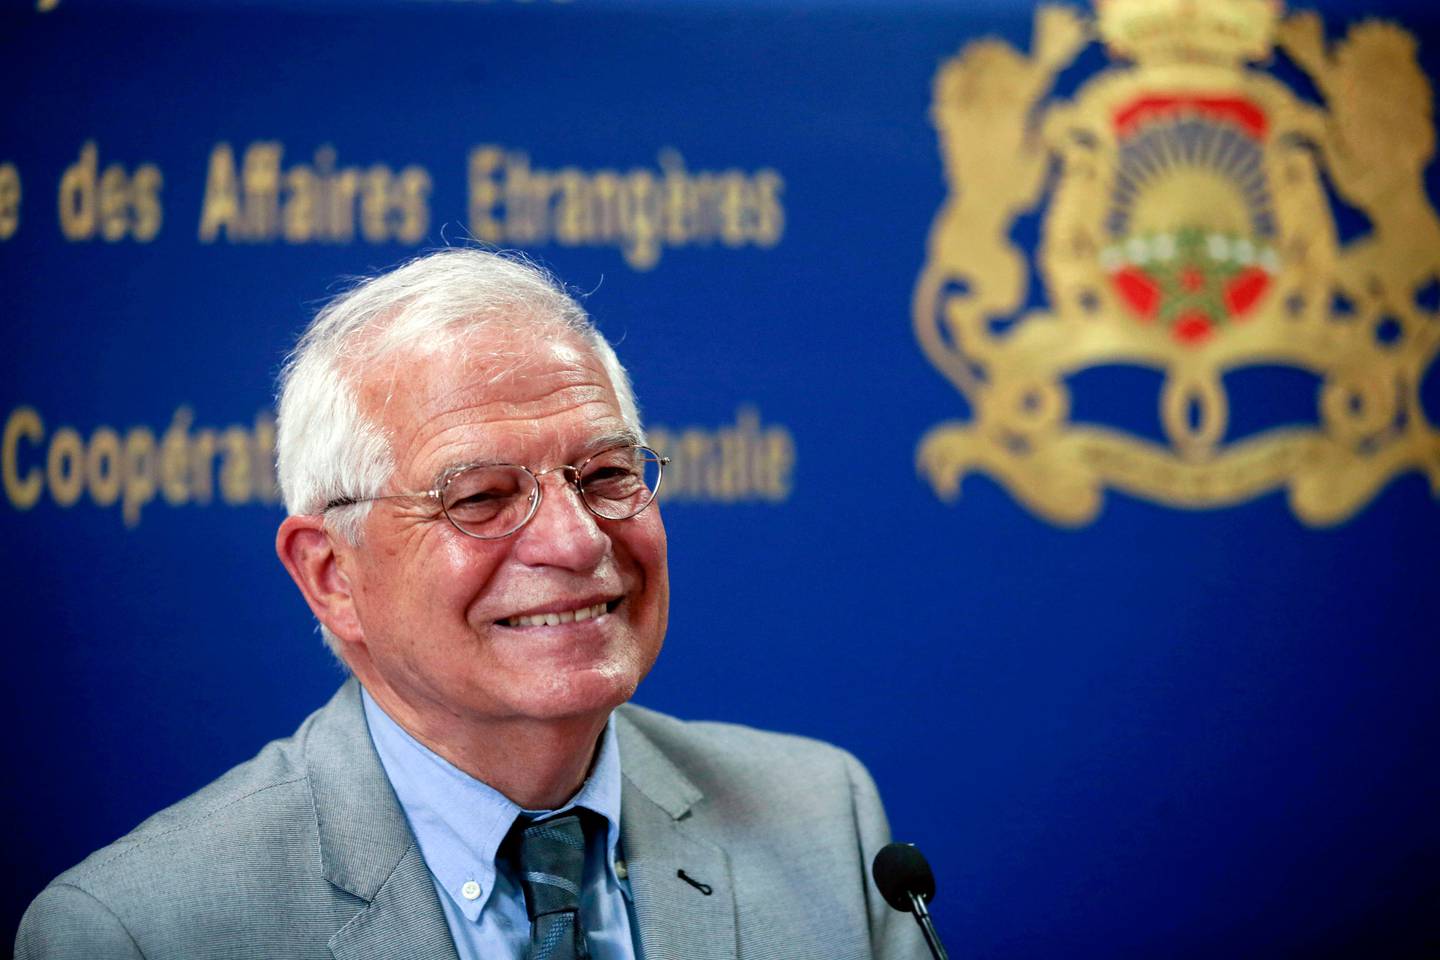 FILE - In this Monday, June 3, 2019 file photo, Spanish Foreign Minister Josep Borrell attends a press conference in Rabat, Morocco. European Union leaders on Tuesday, July 2, 2019, after a lengthy session of talks, have nominated current Spanish foreign minister Josep Borrell for the post of EU foreign policy chief. (AP Photo/Mosa'ab Elshamy, File)